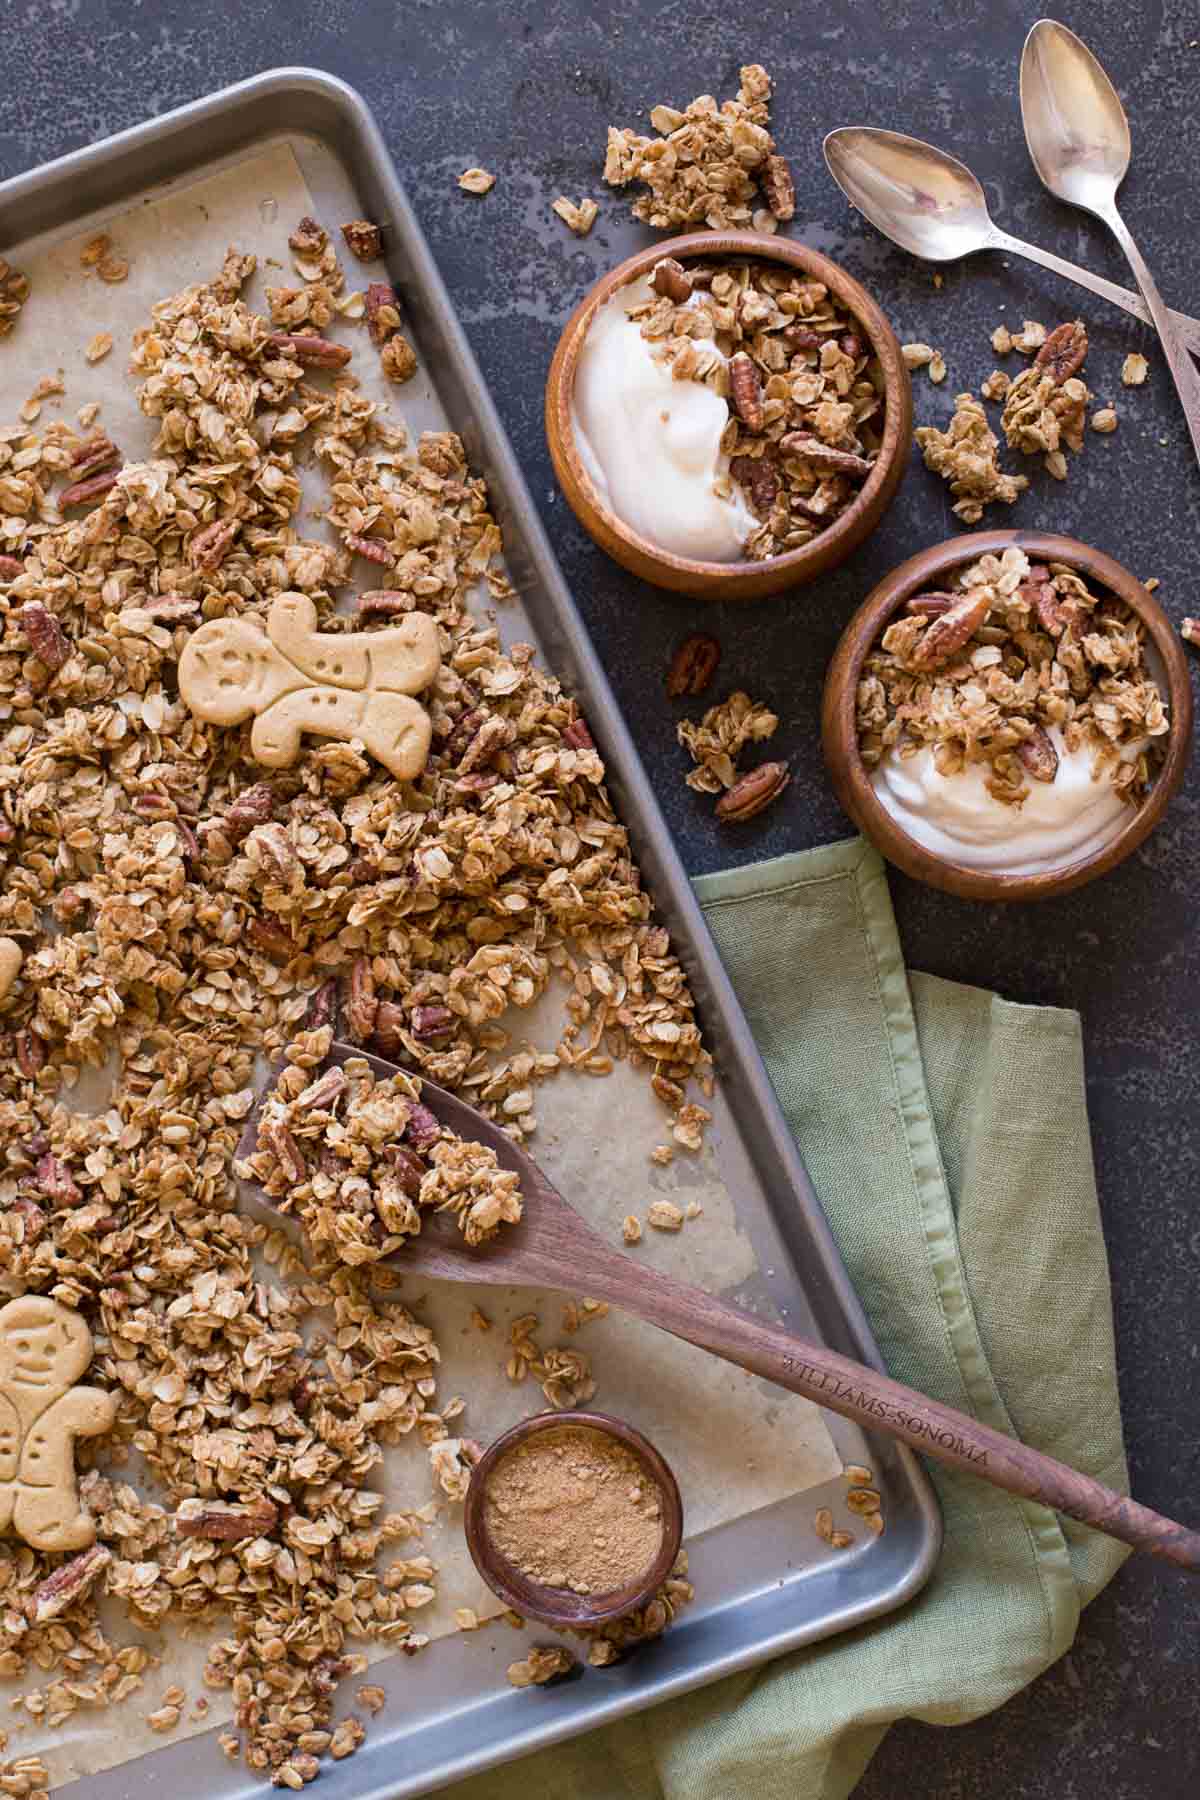 Gingerbread Spice Granola on a parchment paper lined baking sheet with two whole gingerbread man cookies on top of the granola and a small wood bowl of the spices sitting on the baking sheet, along with a wooden spoon.  Next to the baking sheet are two bowls of yogurt and the Gingerbread Spice Granola and two spoons.  